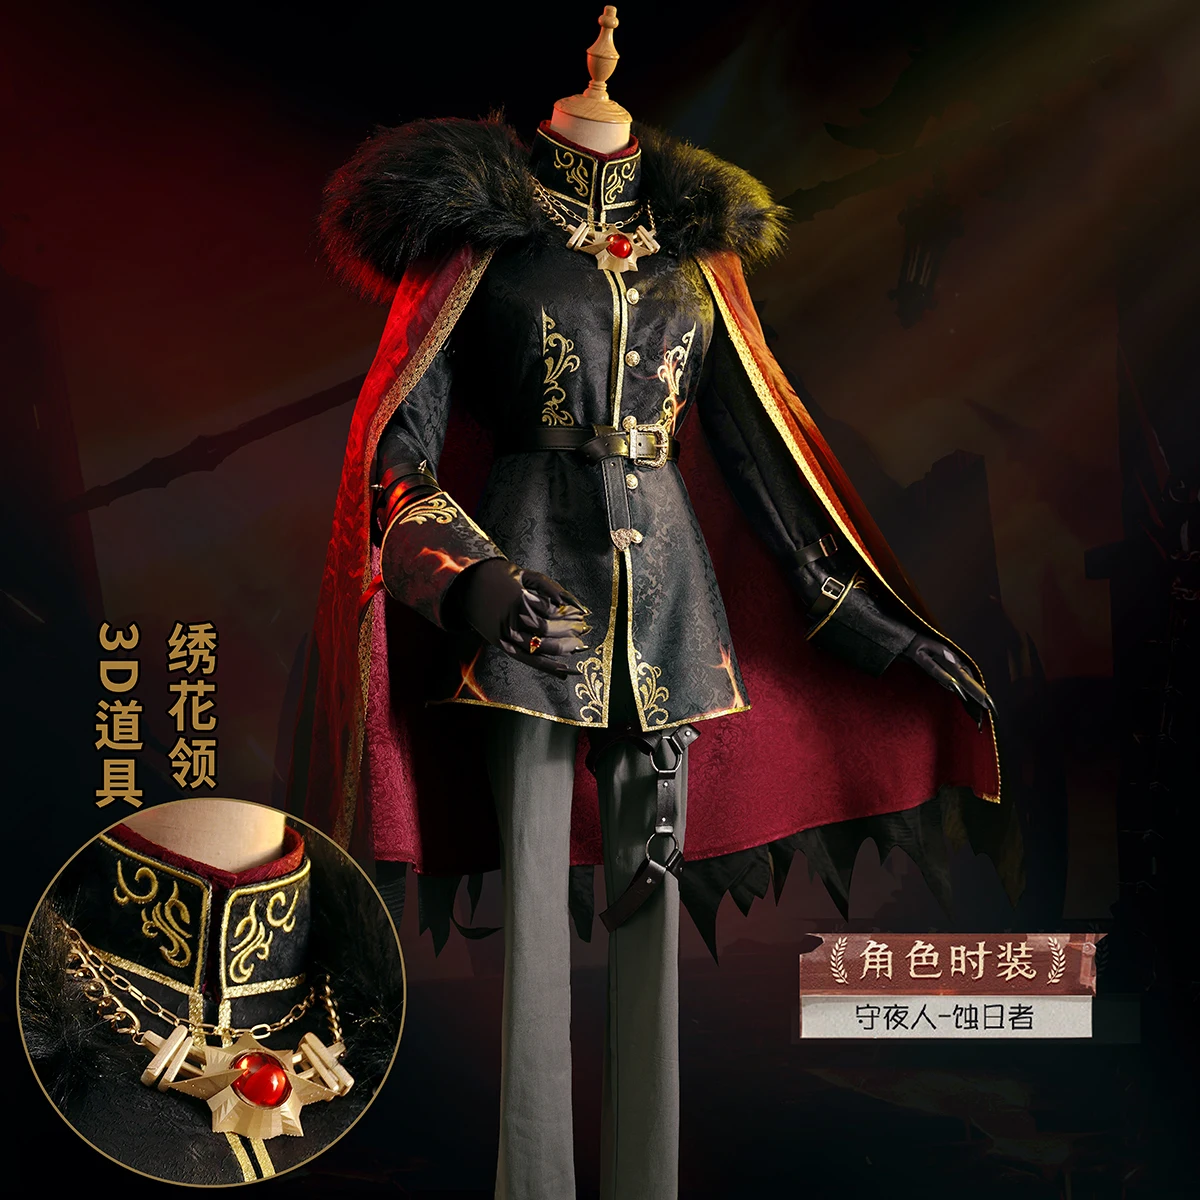 

COS-KiKi Identity V Ithaqua Sun Gold Skin Fashion Game Suit Cosplay Costume Gorgeous Uniform Halloween Party Role Play Outfit